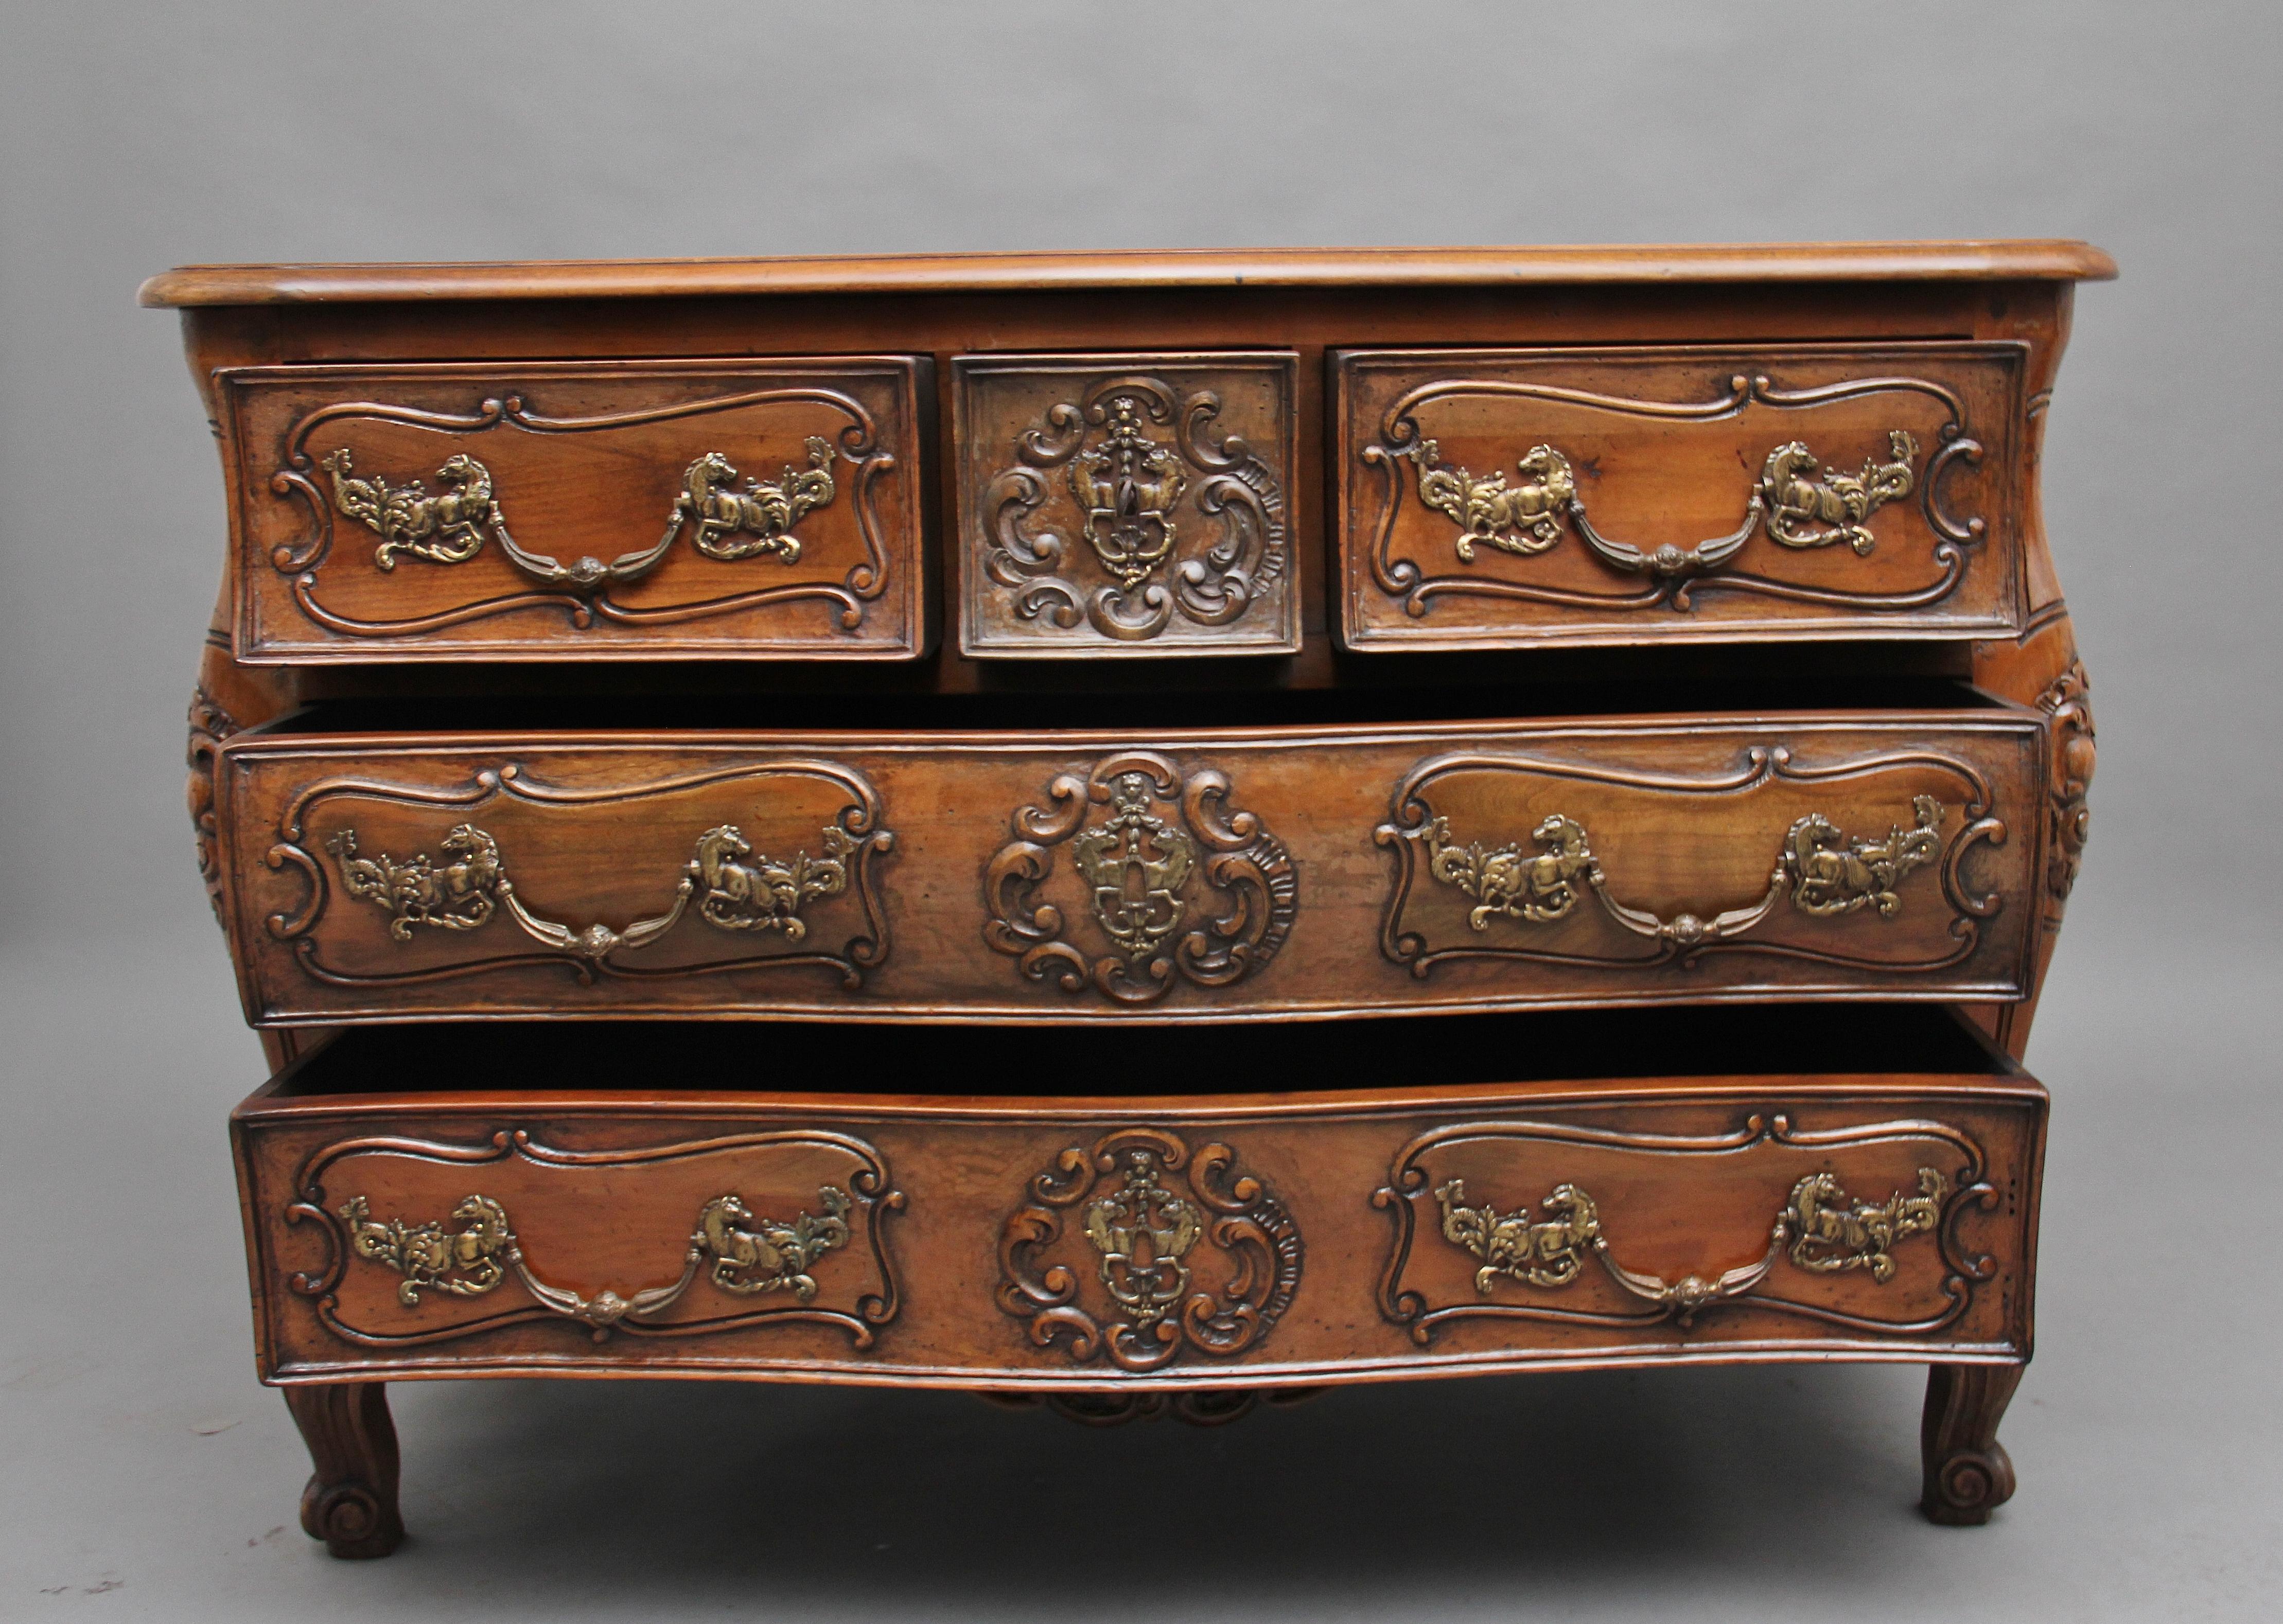 A superb quality early 20th century French fruitwood commode of serpentine bombe form, having a shaped, moulded edge top above three small drawers over two long deep drawers with original brass handles and escutcheons, lovely carved drawer fronts,